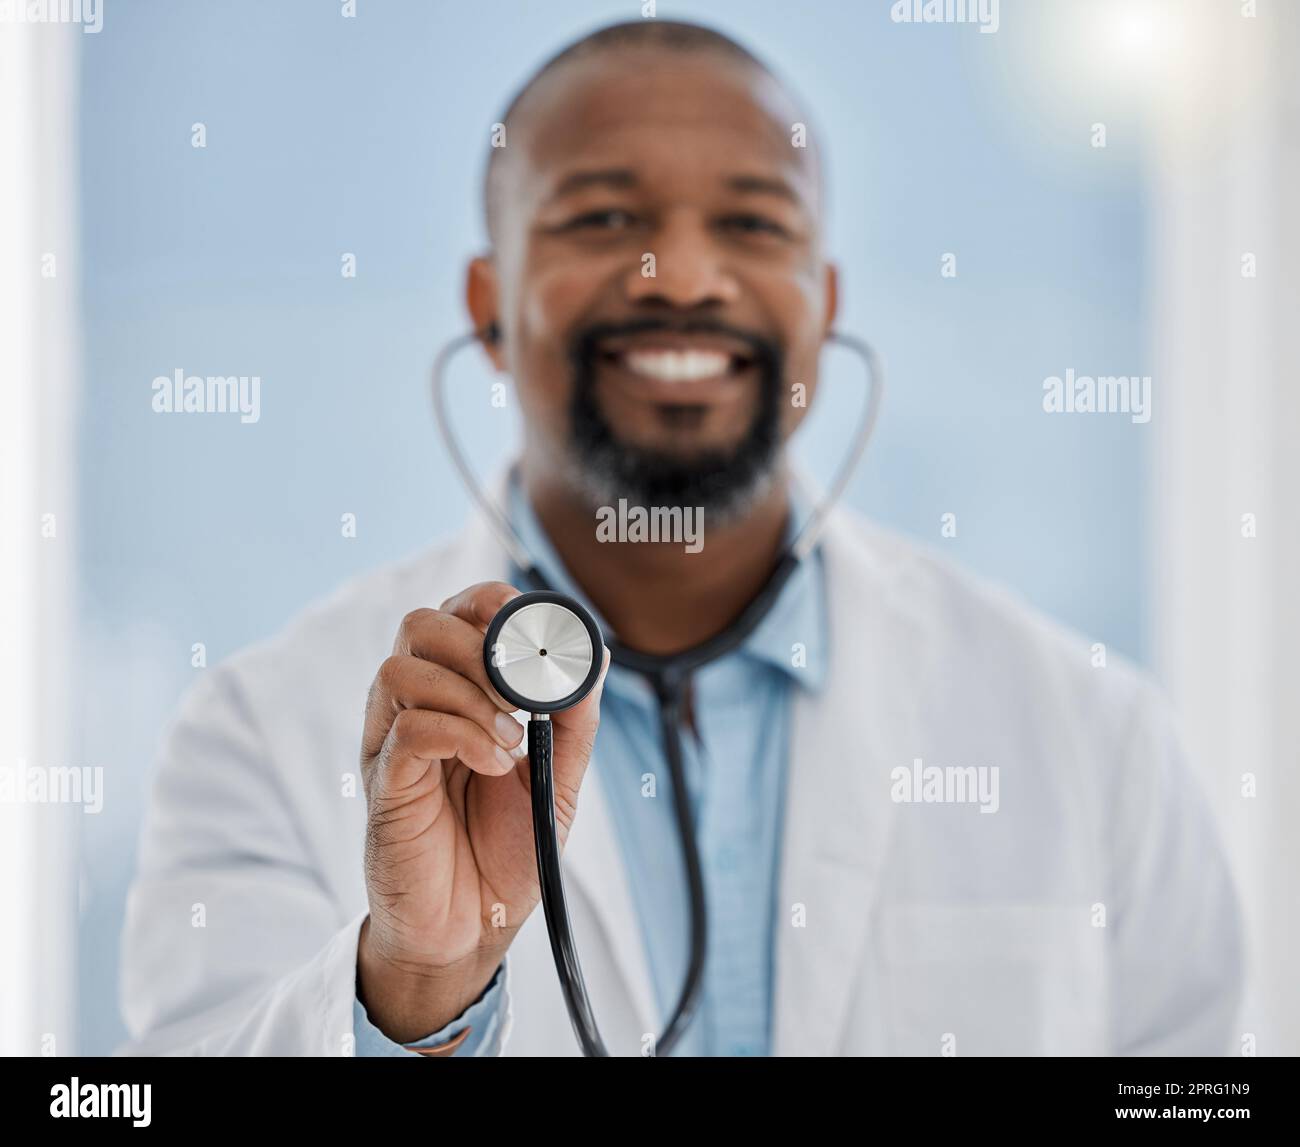 Medical, healthcare worker and doctor with a stethoscope and smile ready for a patient. Hospital, health clinic or professional doctors office worker happy to help check heart health of patients Stock Photo